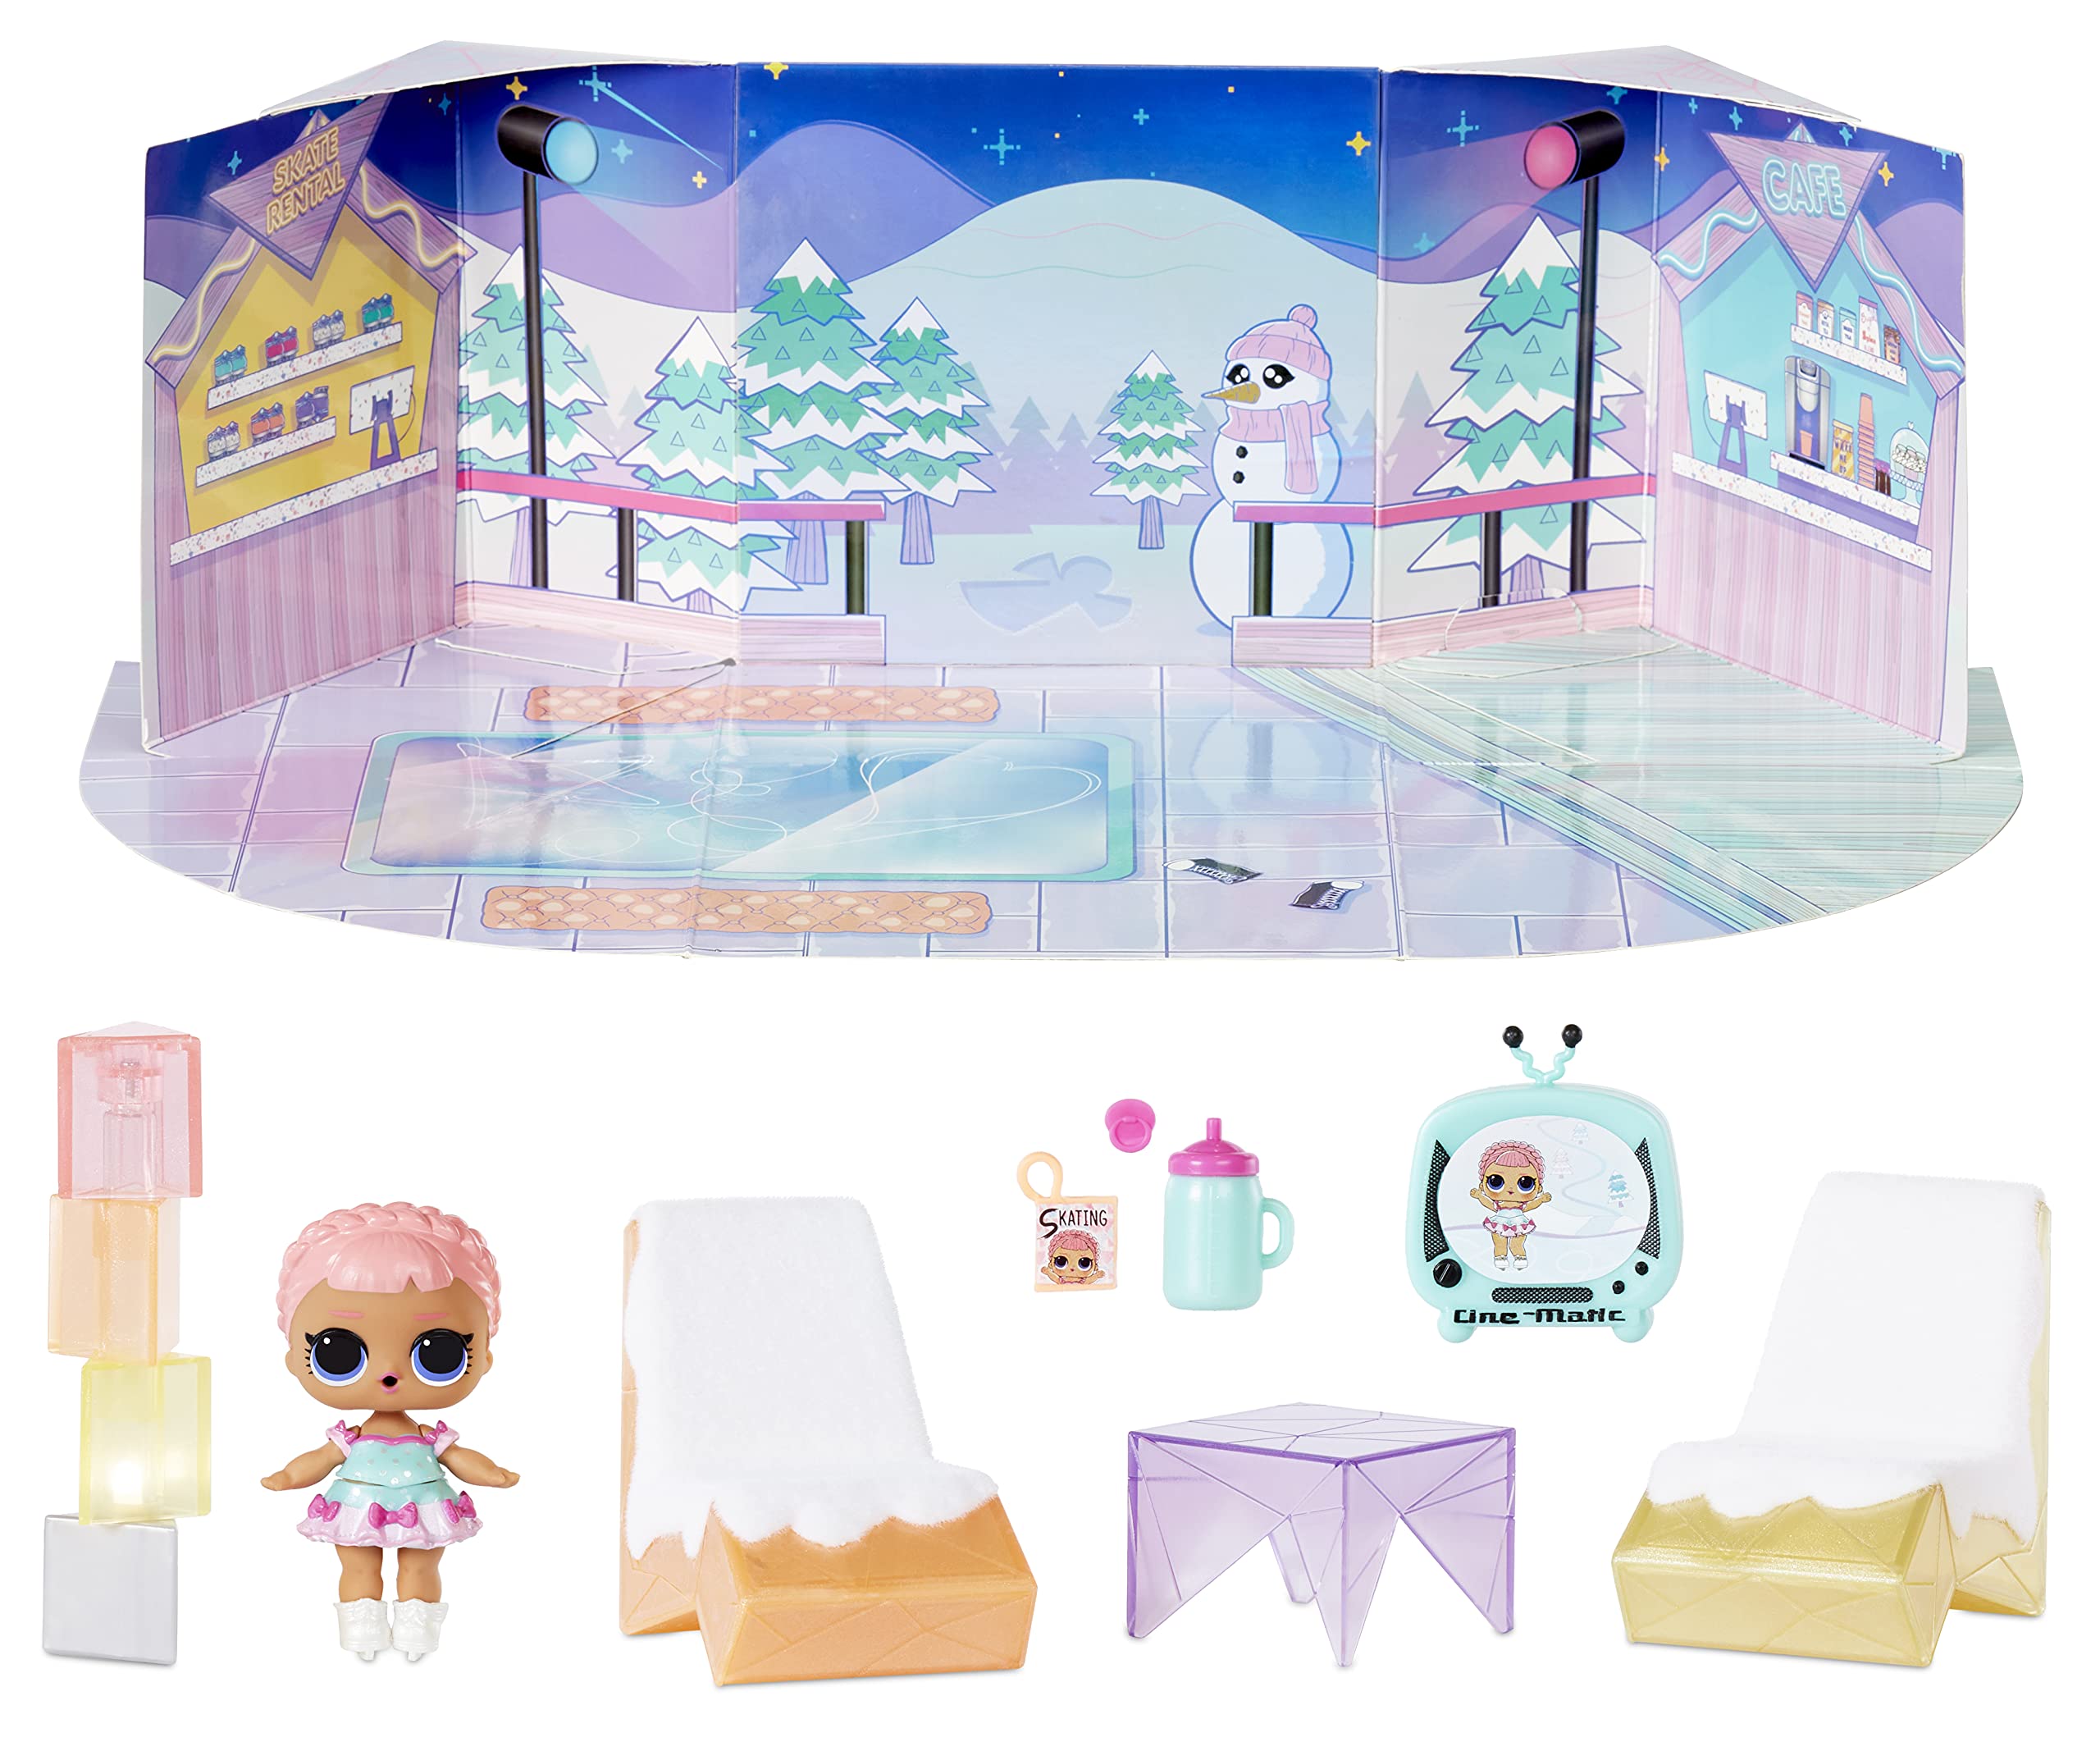 L.O.L. Surprise! Winter Chill Hangout Spaces Furniture Playset with Ice Sk8er Doll, 10+ Surprises with Accessories, for LOL Dollhouse Play- Collectible Toy for Kids, Gift for Girls Boys Ages 4 5 6 7+